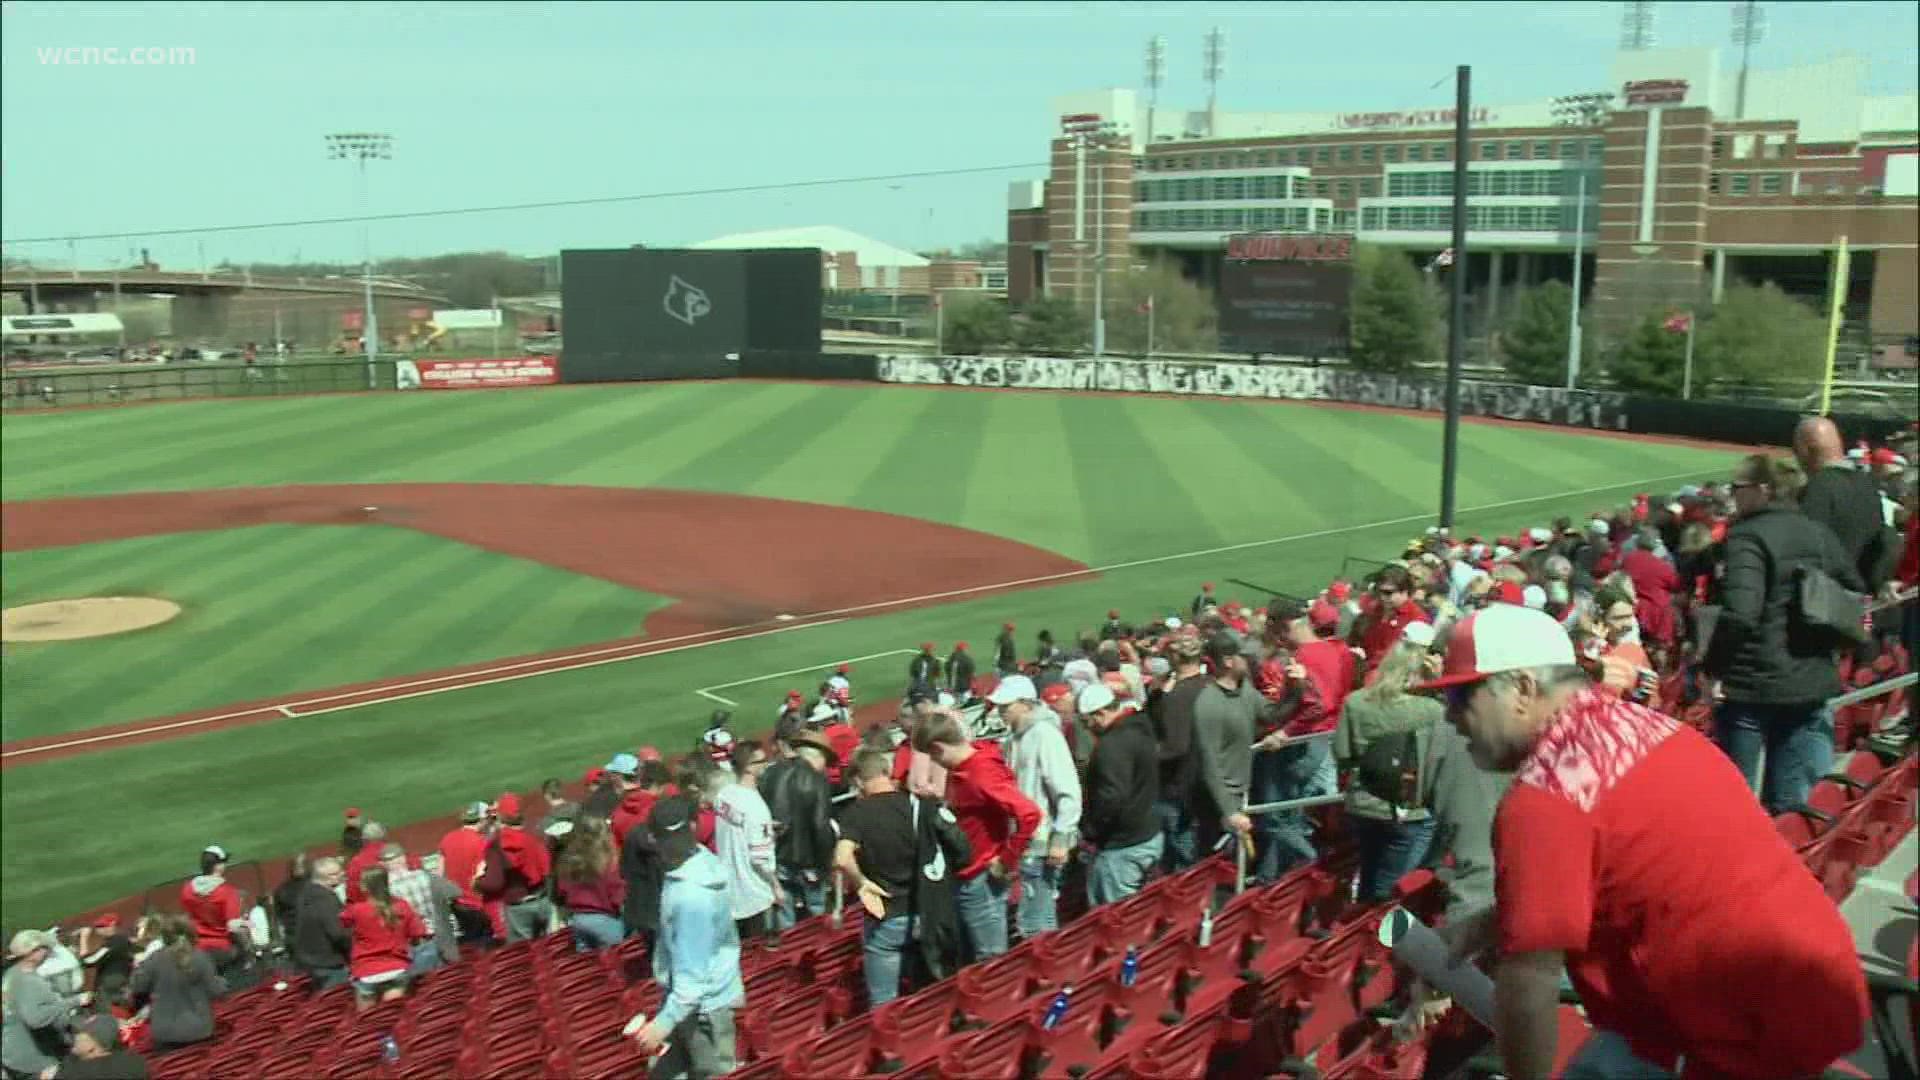 North Carolina and Louisville baseball game halted after apparent